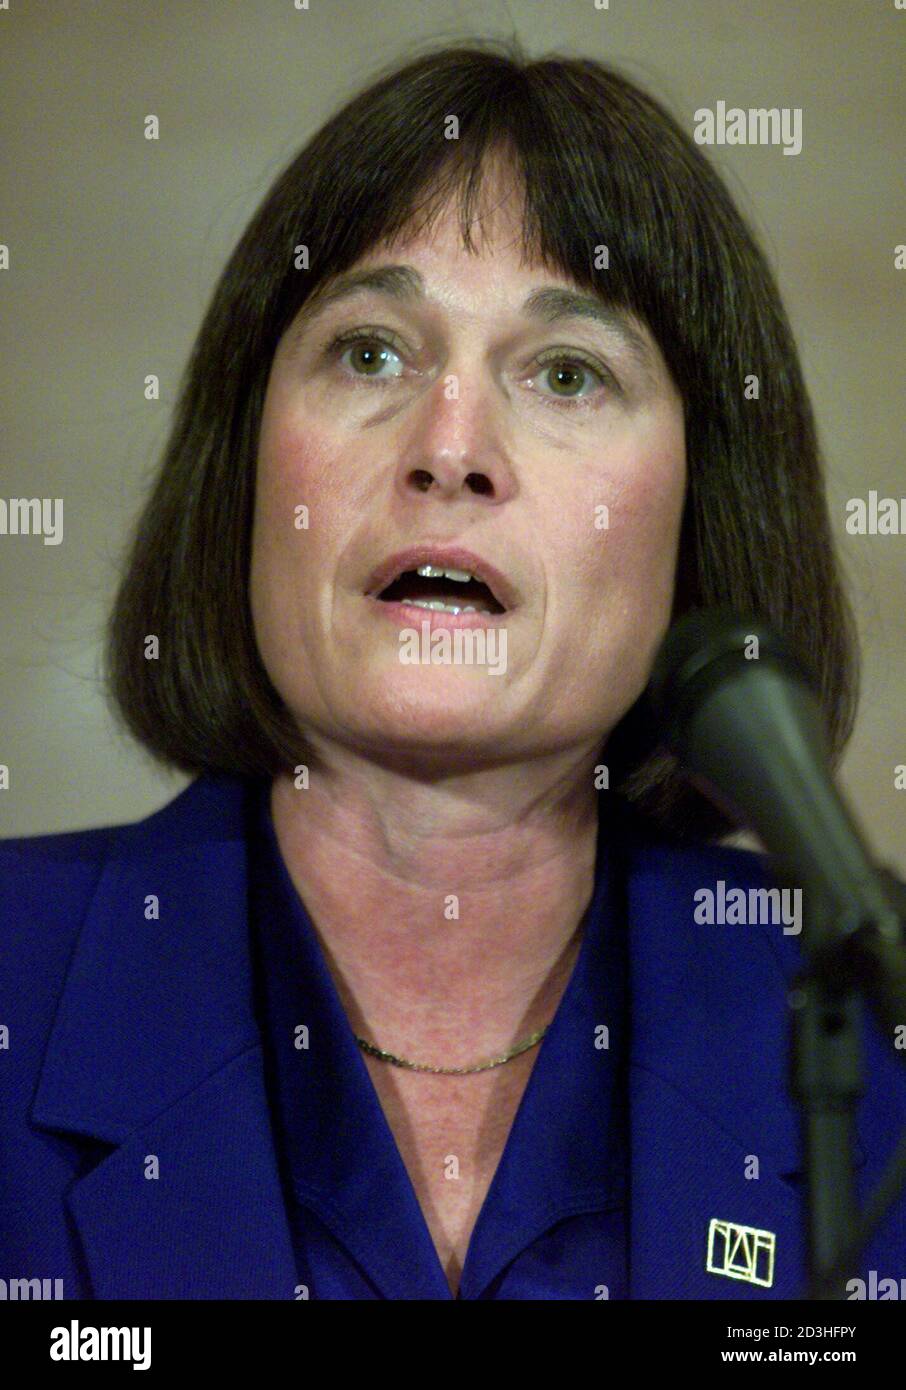 Vicki Saporta, the Executive Director of the National Abortion Federation, speaks at a news conference called by Danco Labratories, in New York, September 28, 2000.  The news conference followed the Federal Drug Administration's (FDA) approval of the drug Mifeprex (Mifepristone) the early option abortion pill for women.  Danco Labratories has been granted exclusive liscense to manufacture, market and distribute Mifeprex in the United States. Stock Photo